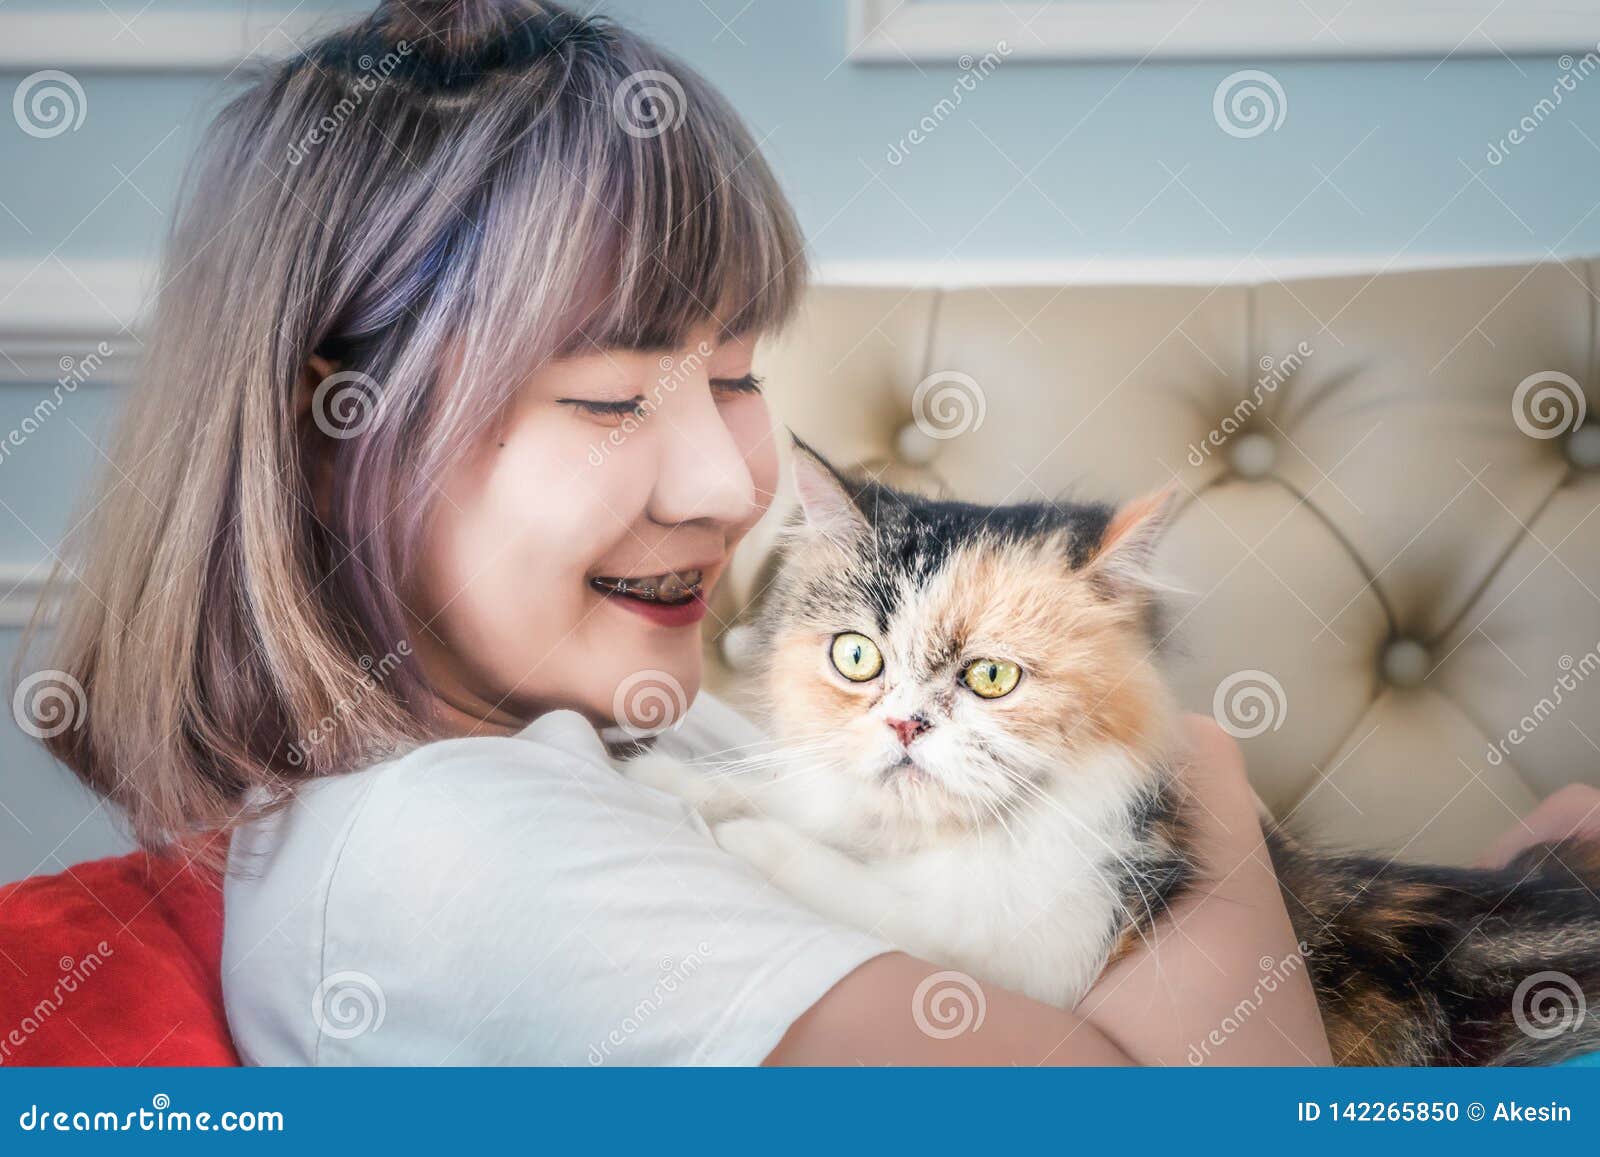 Asian female with cute cat stock photo. Image of adult - 142265850